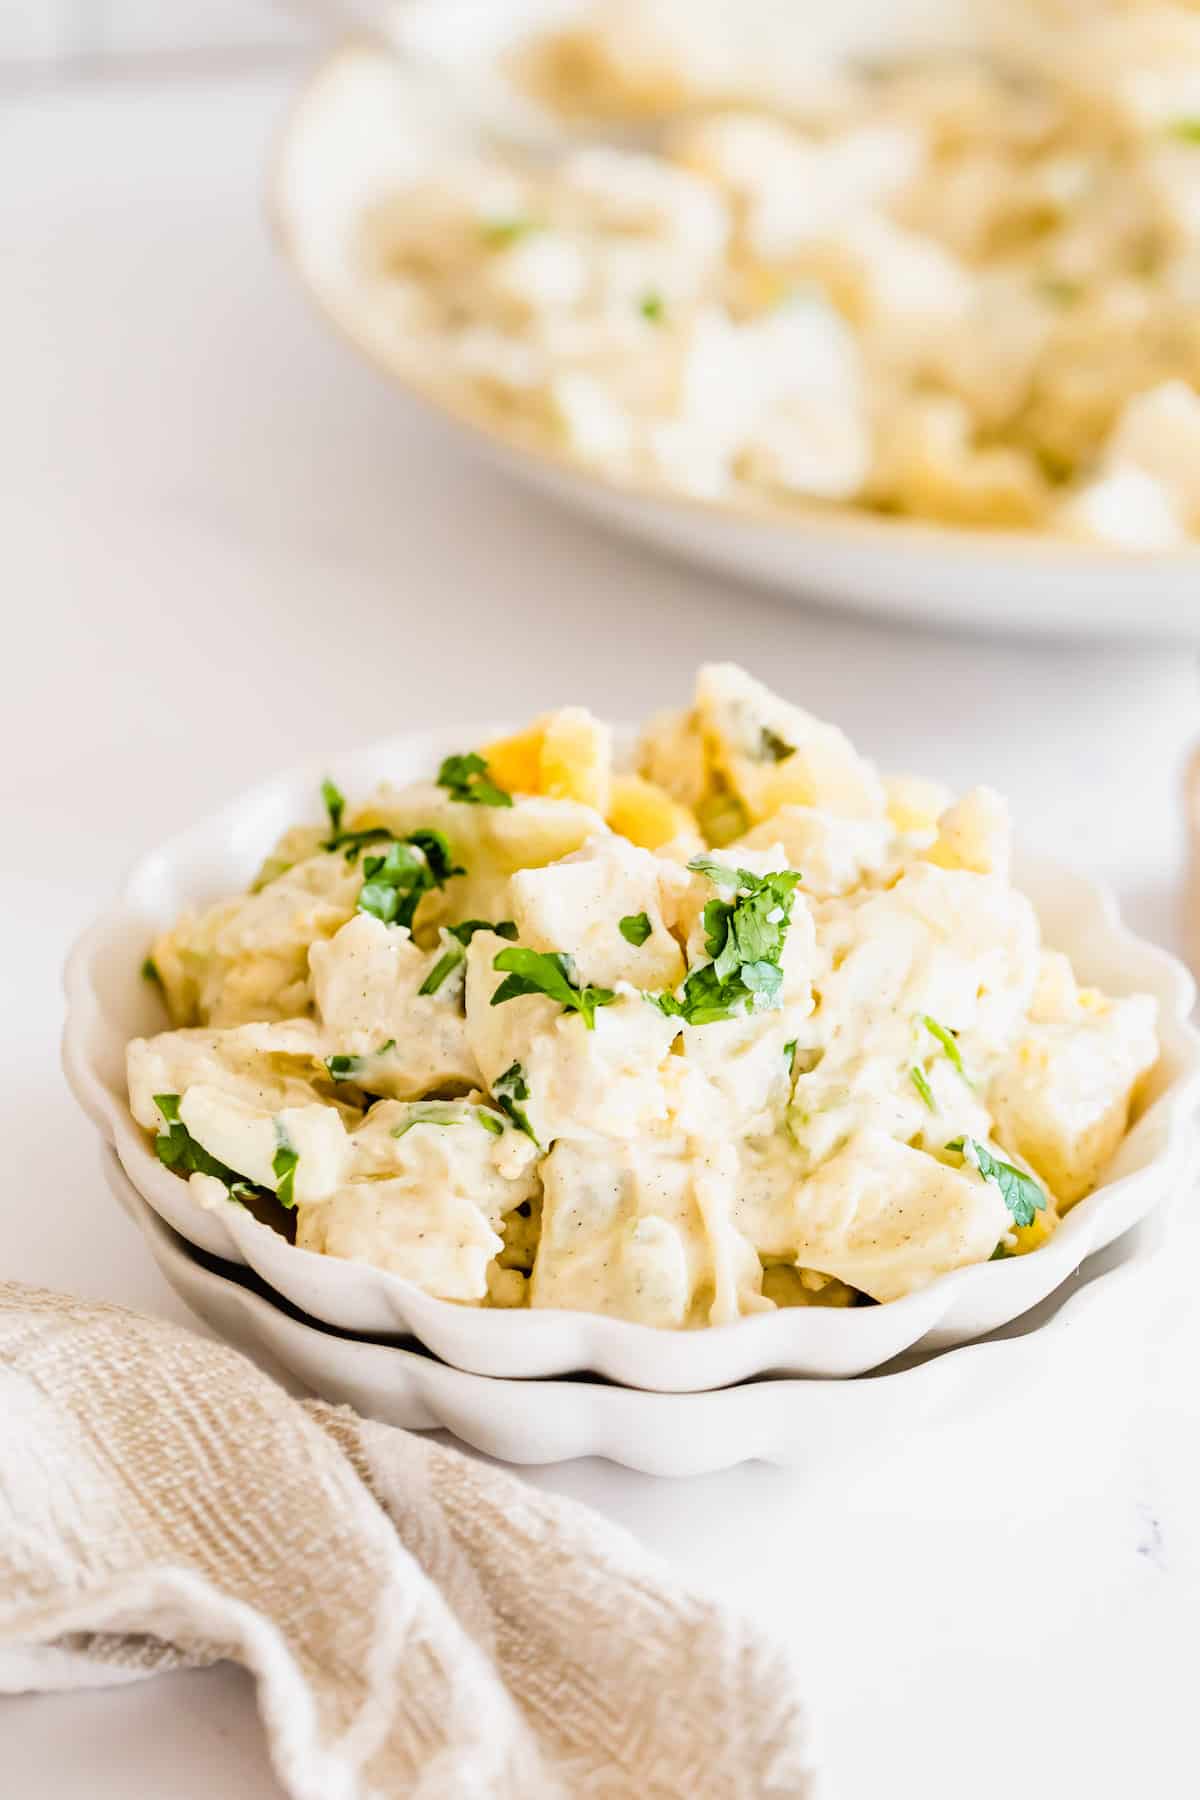 A Serving of Instant Pot Potato Salad in a Bowl with a Larger Plate of Potato Salad Behind it